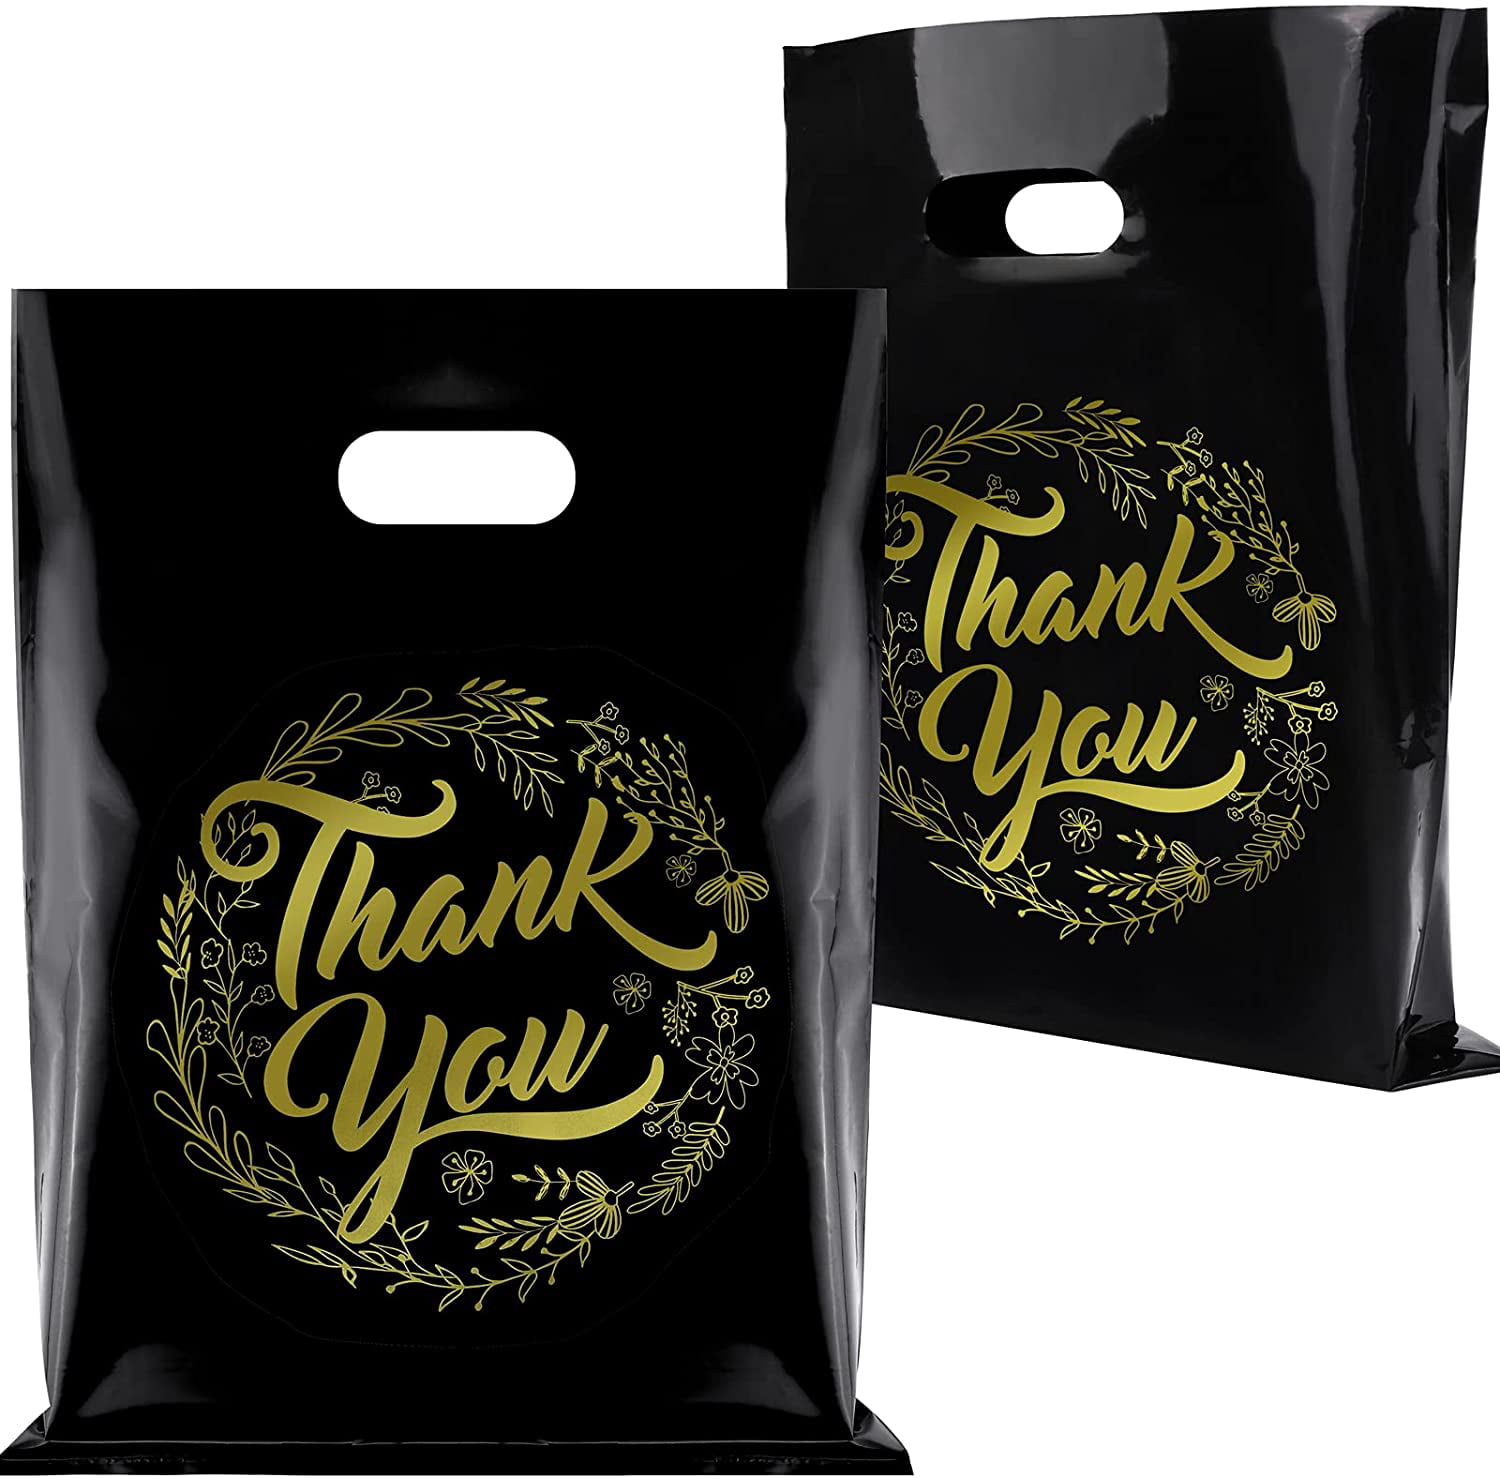 12x15 Shopping Bags Black & Gold Thank You Pack of 100 